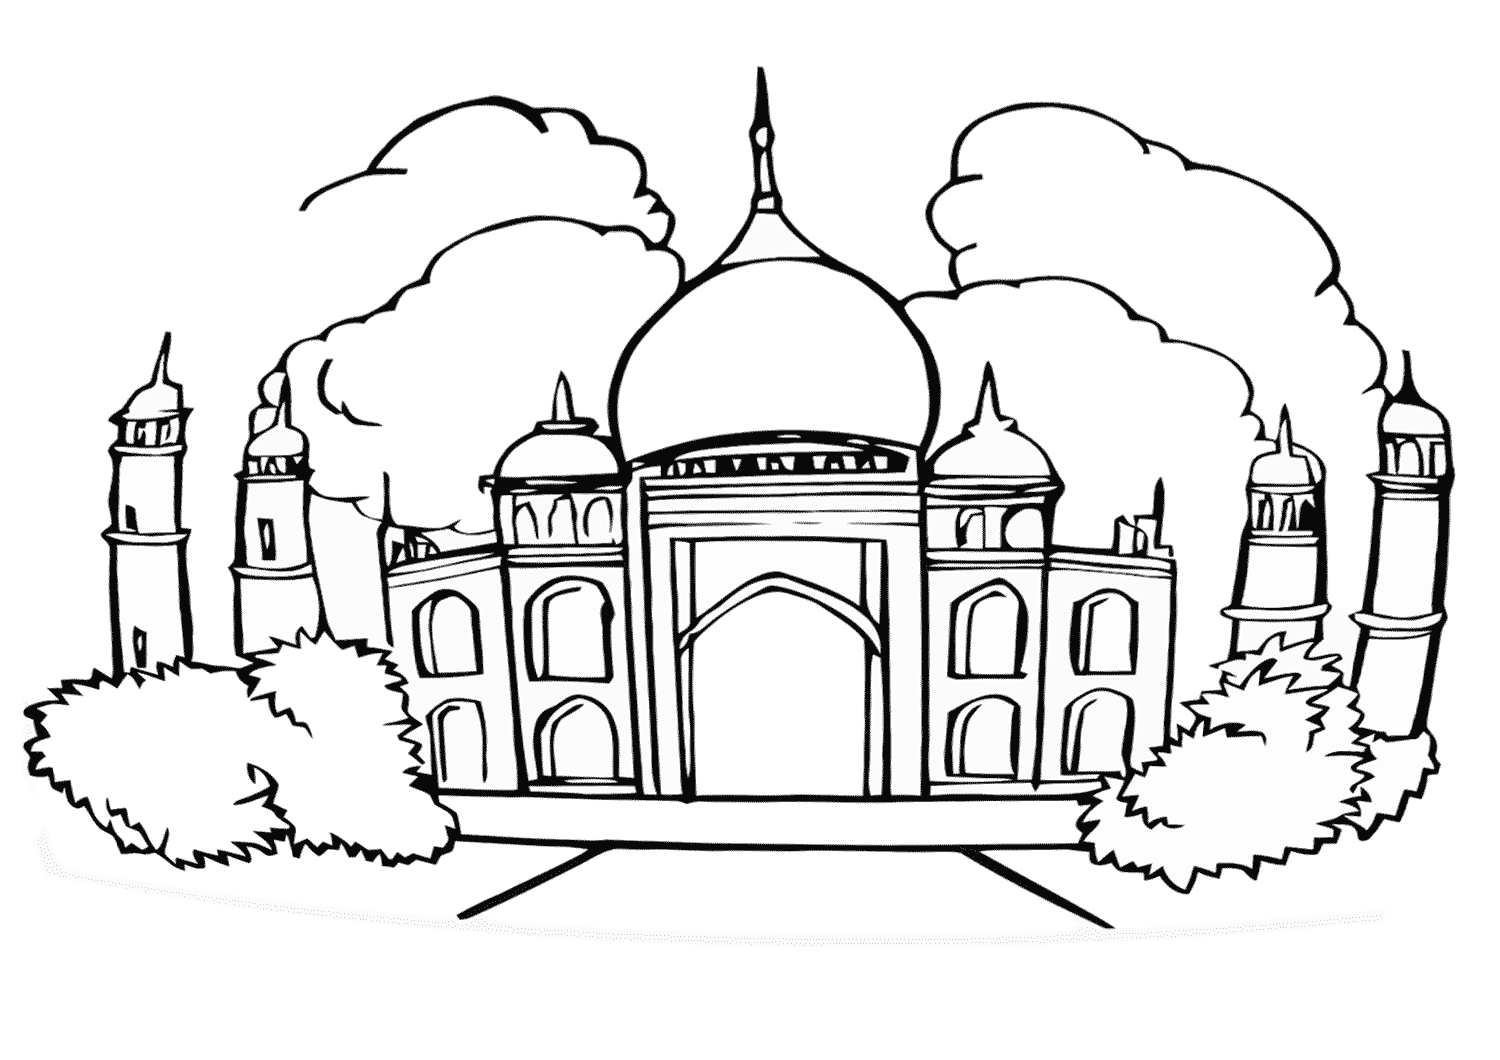 Mosque coloring pages | Coloring pages to download and print